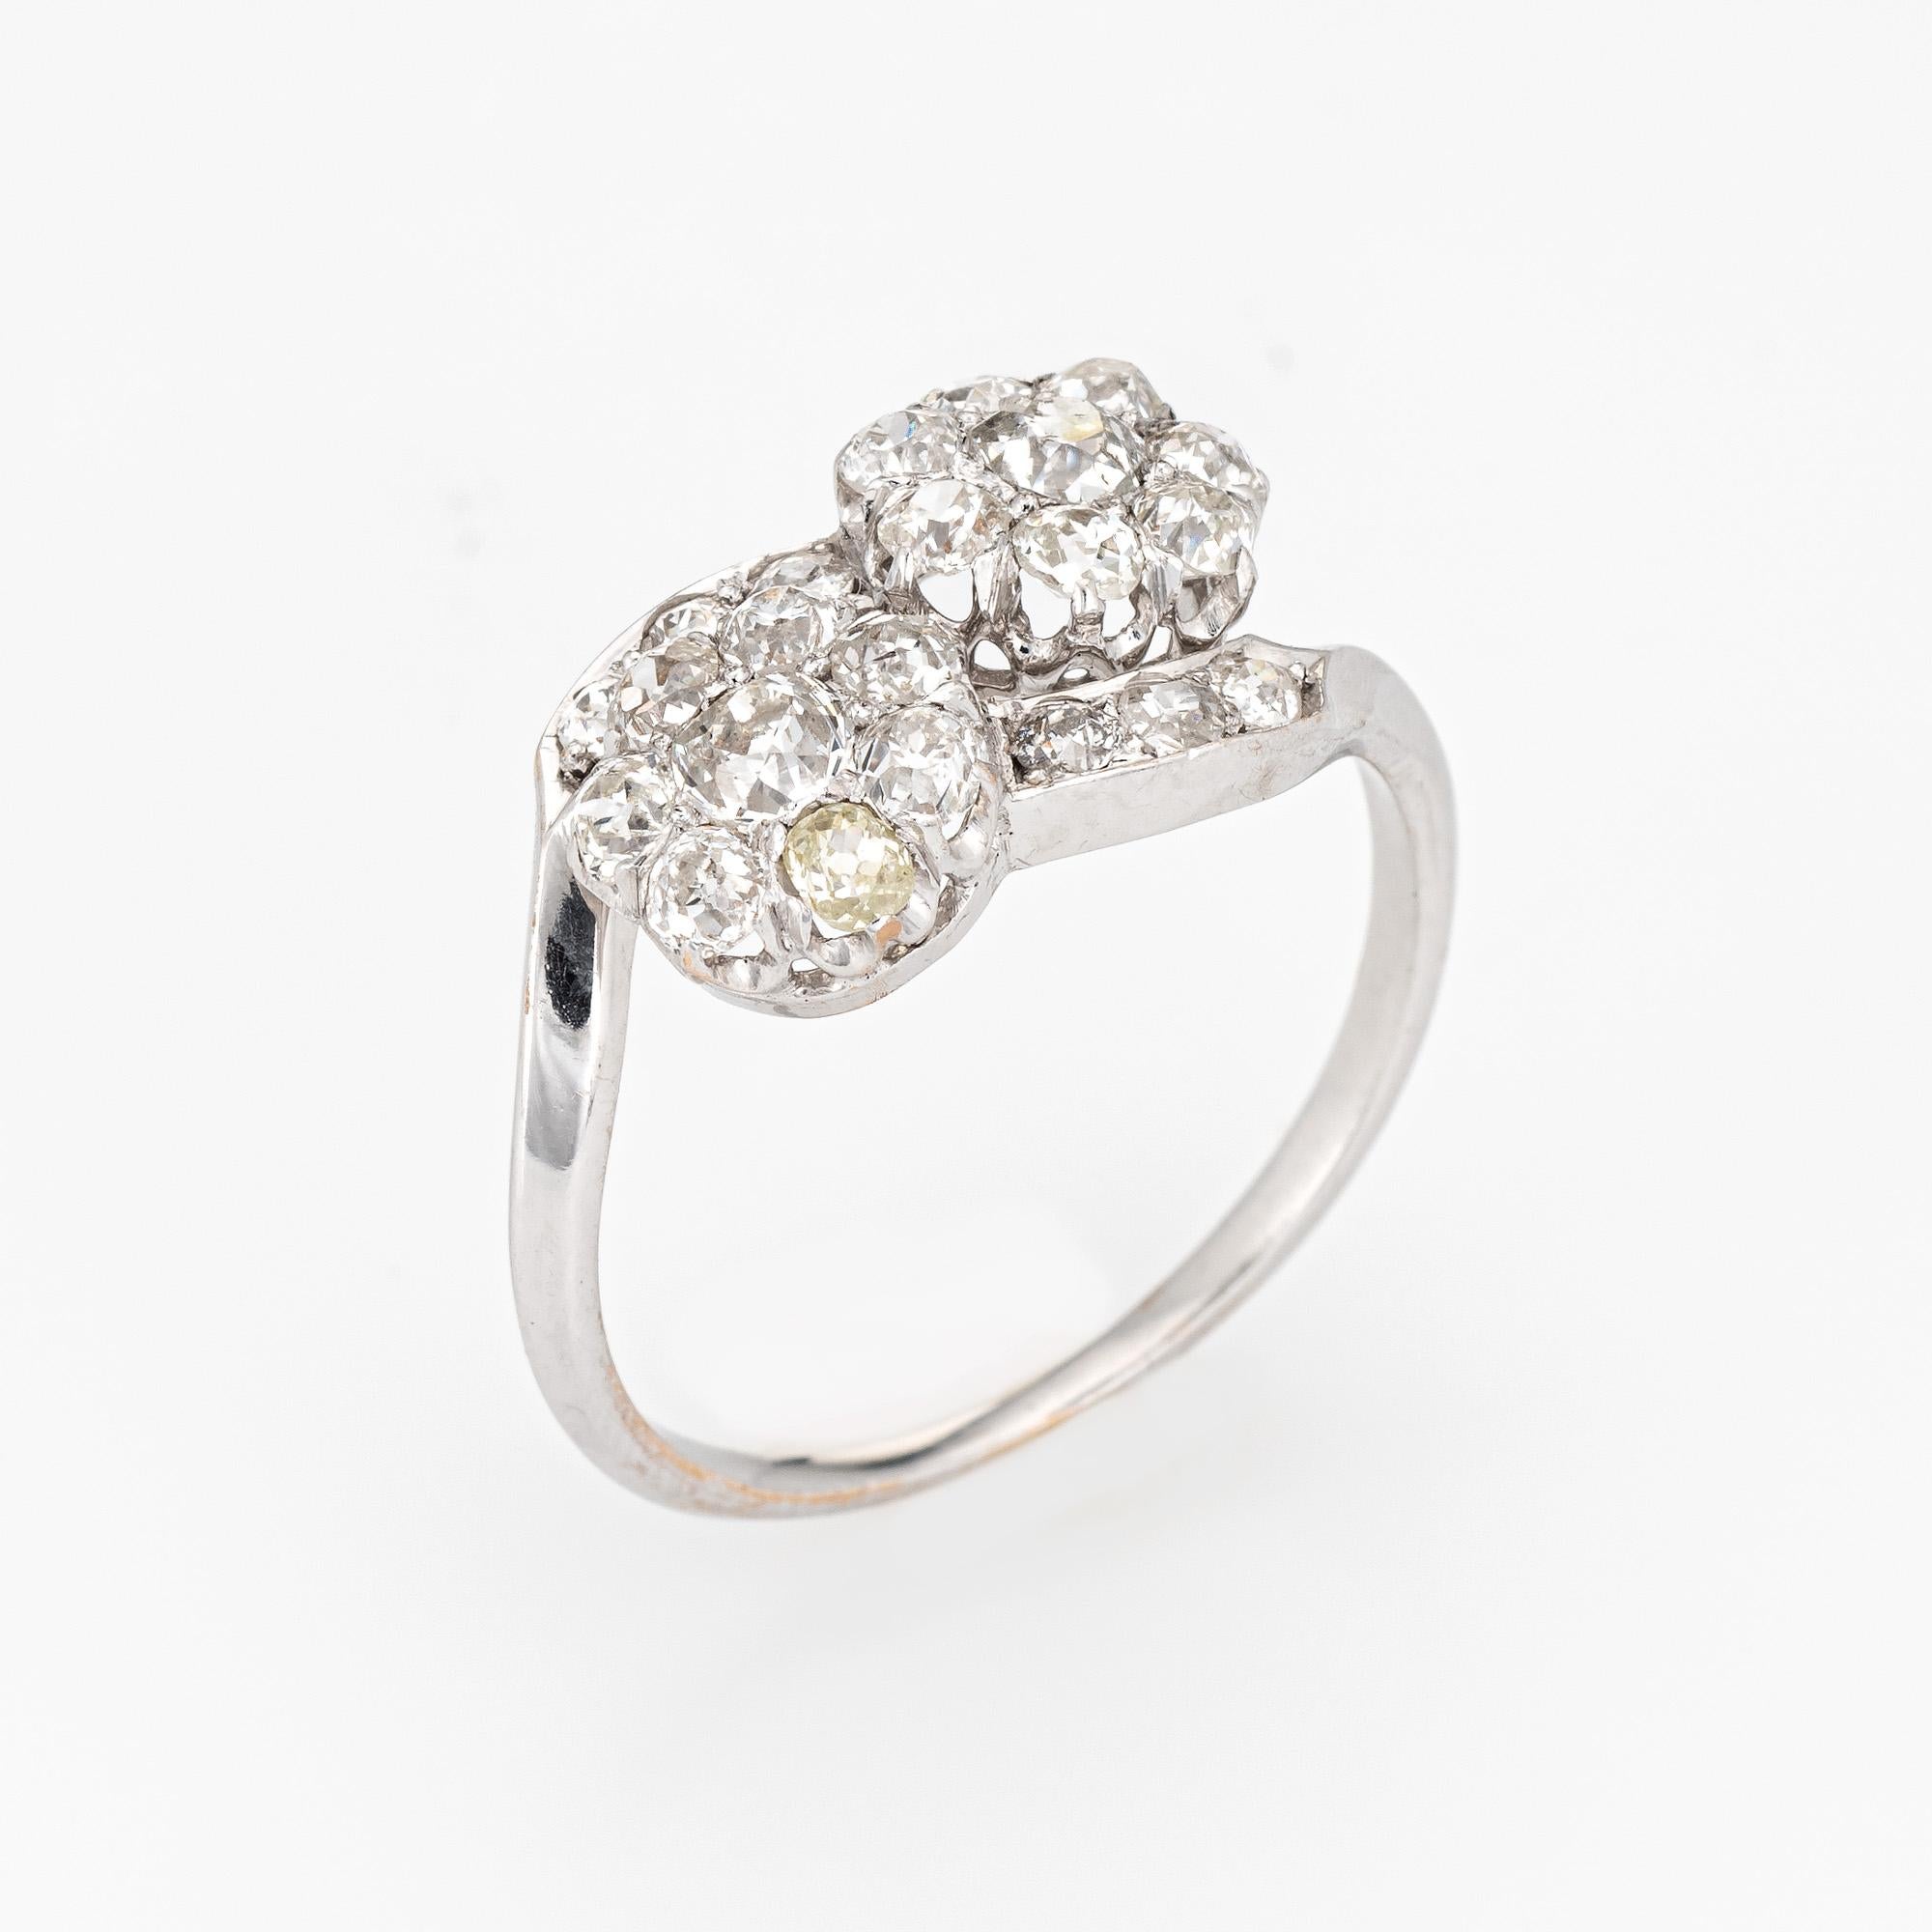 Finely detailed antique Edwardian diamond 'moi et toi' cluster ring crafted in 18k white gold (circa 1910s to 1920s).  

Old mine cut diamonds range in size from 0.03 to 0.15 carats and total an estimated 2 carats (estimated at K-L color and SI1-2